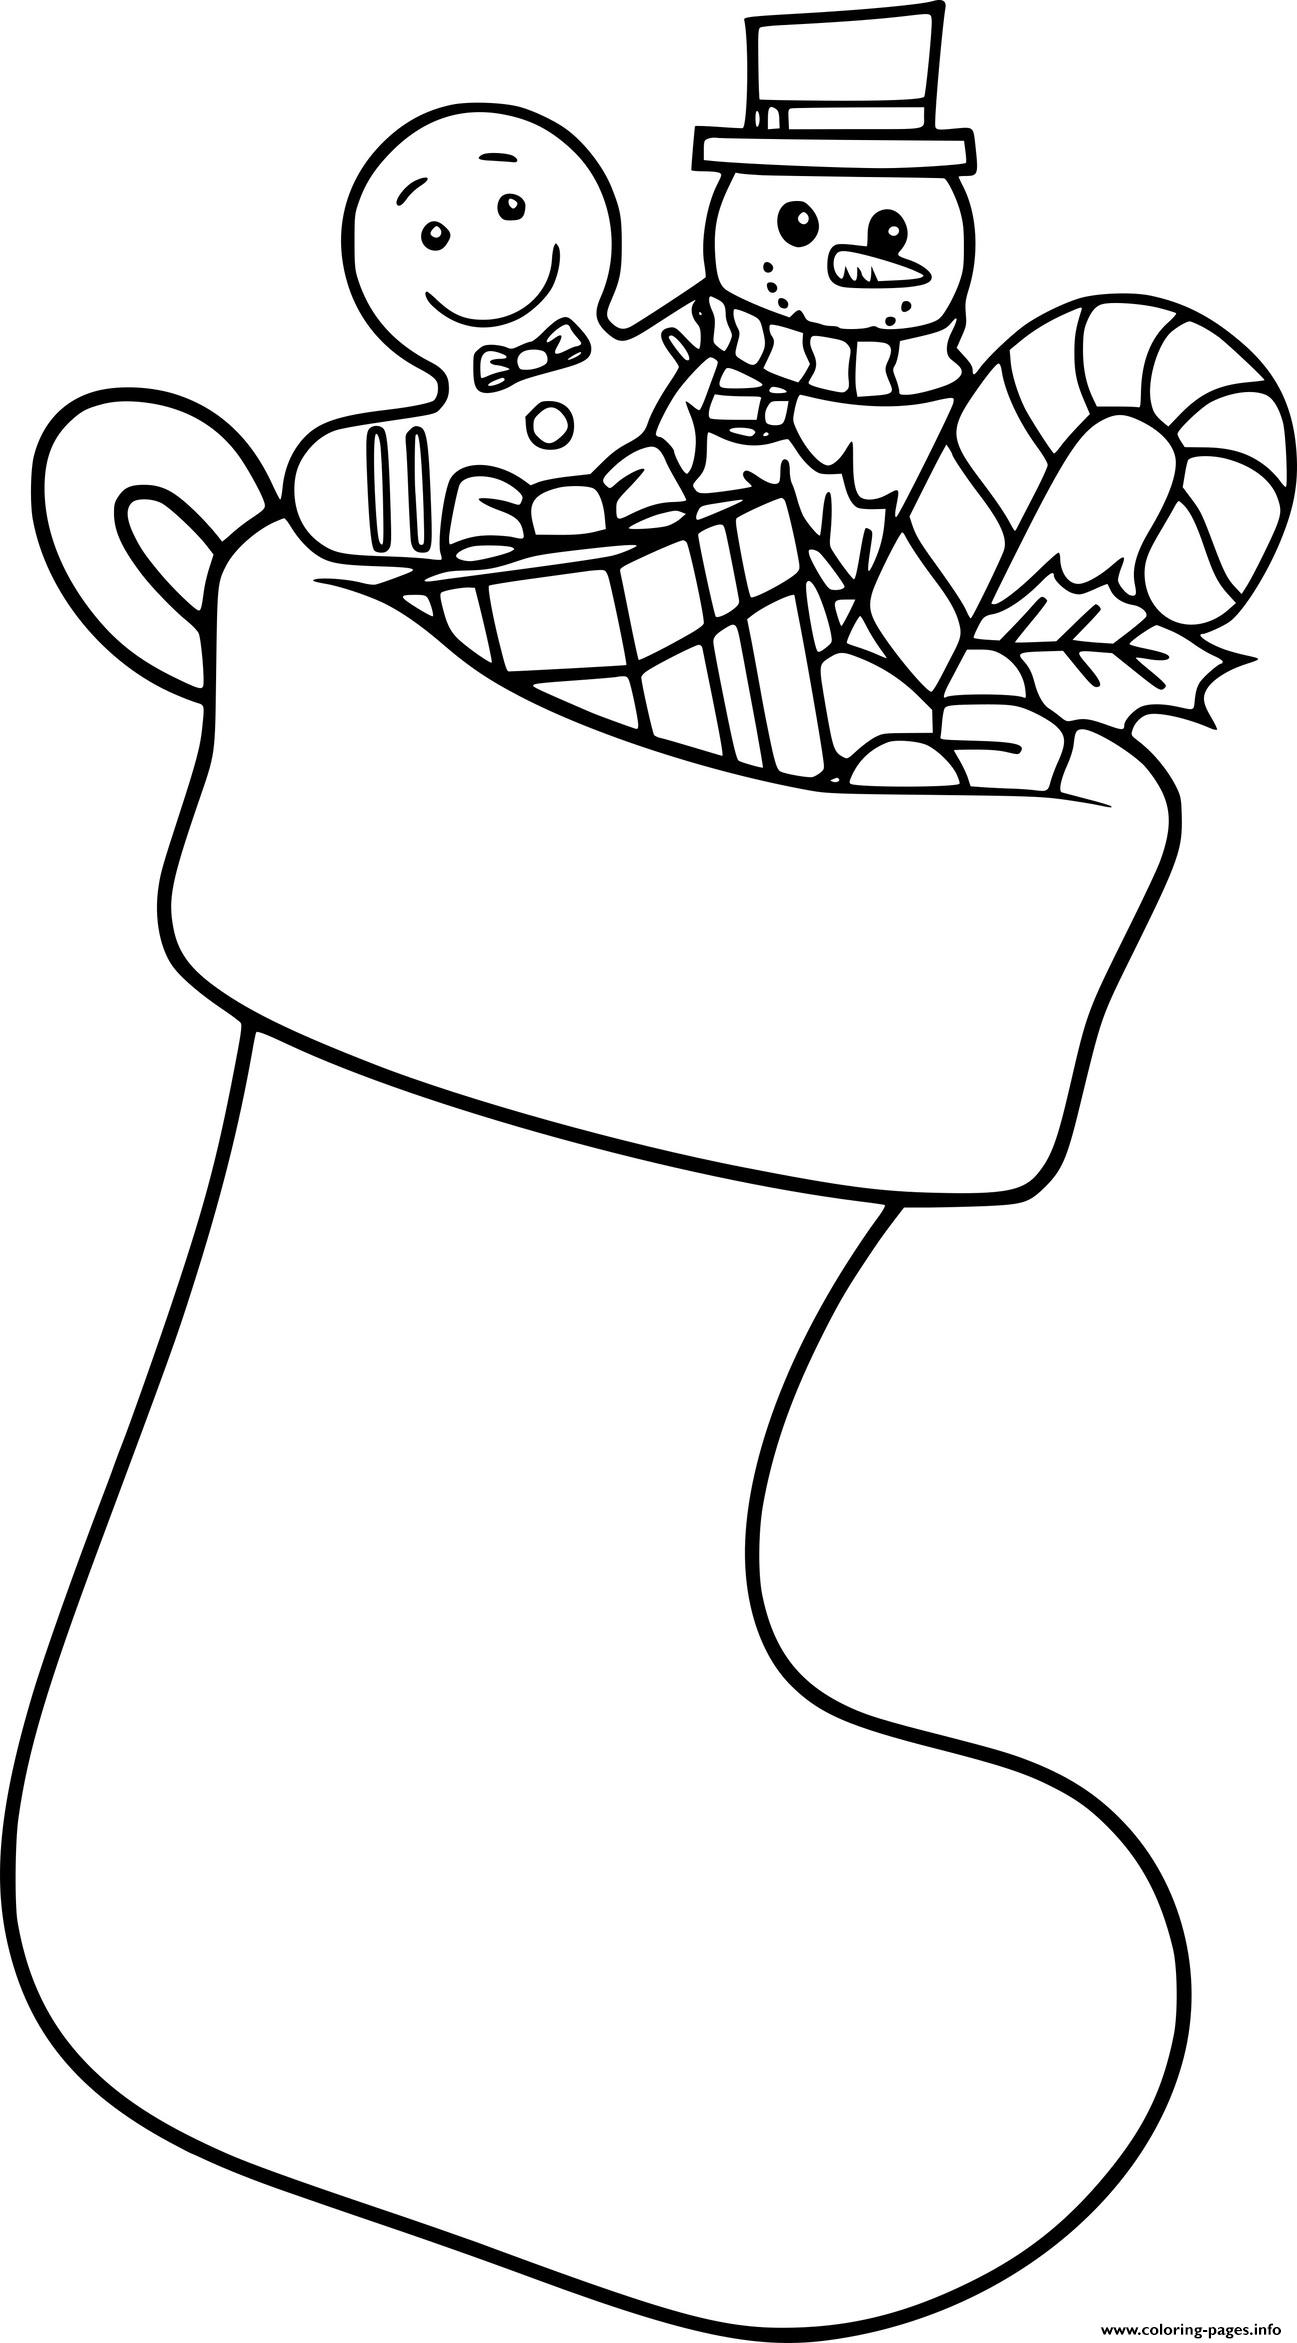 Snowman And Gingerbread Man In Stocking Coloring page Printable